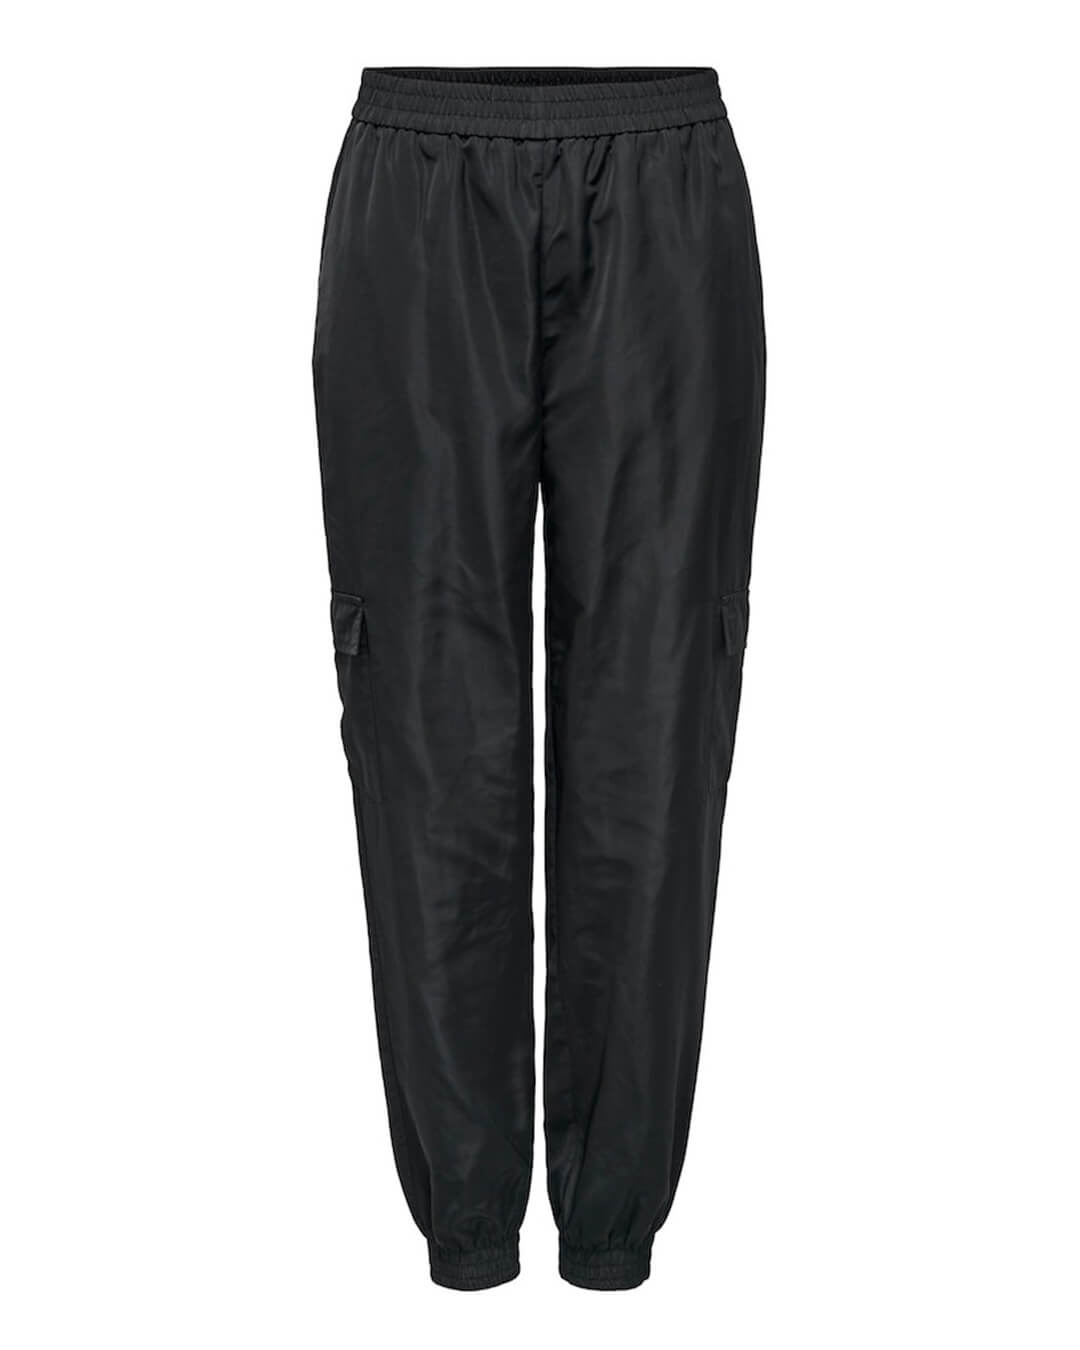 Only Trousers Only Faduma Black Cargo Trousers